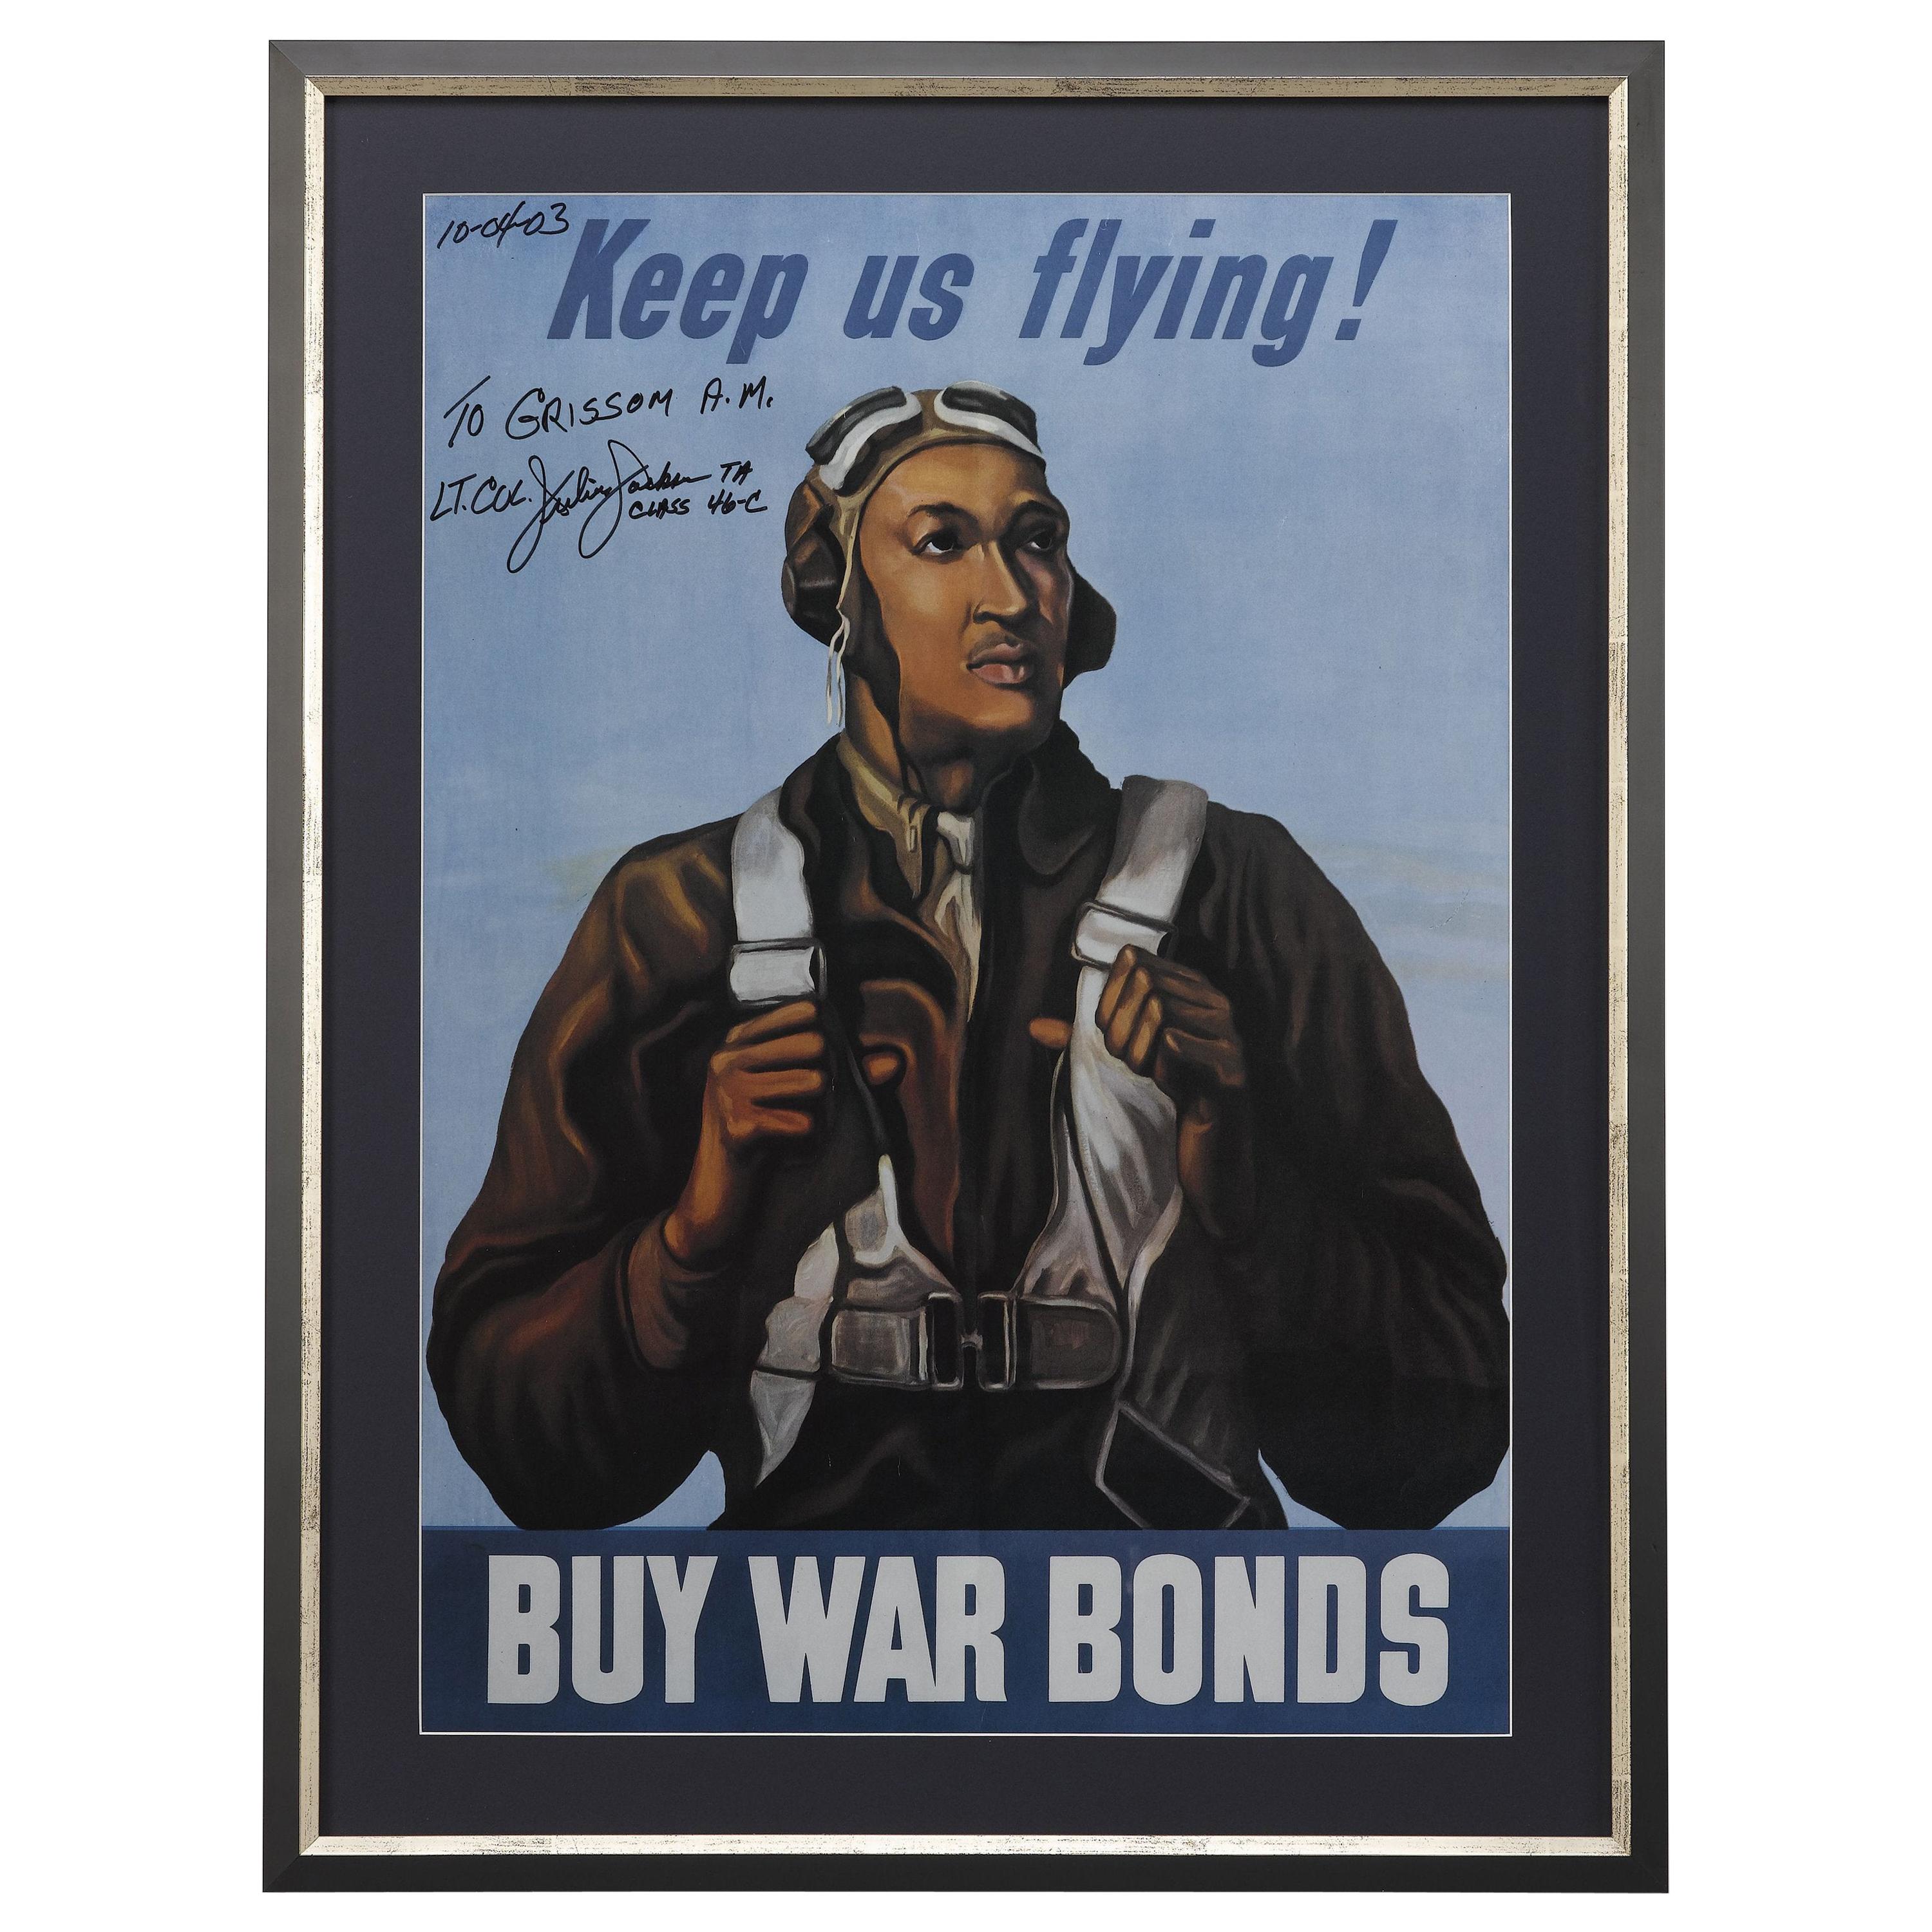 Tuskegee Airman WWII War Bonds Poster Signed by Lt. Col. Julius Jackson